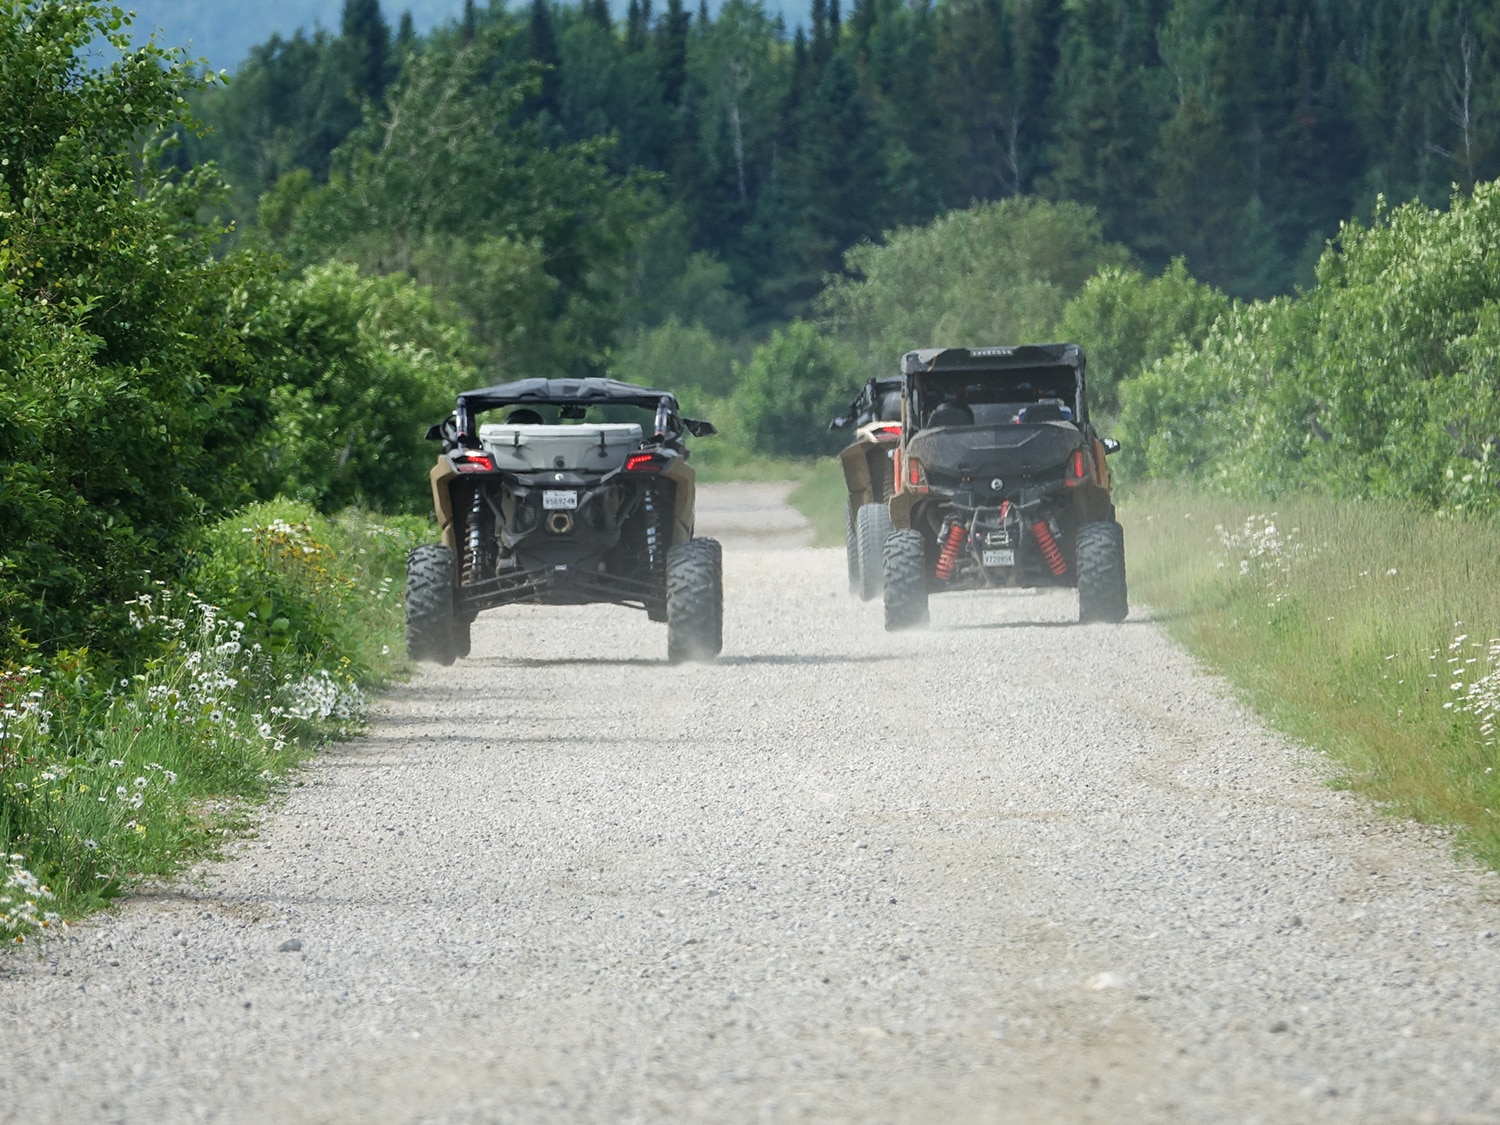 The beauty of the Quebec countryside by ATV/SSV in La Malbaie, QC